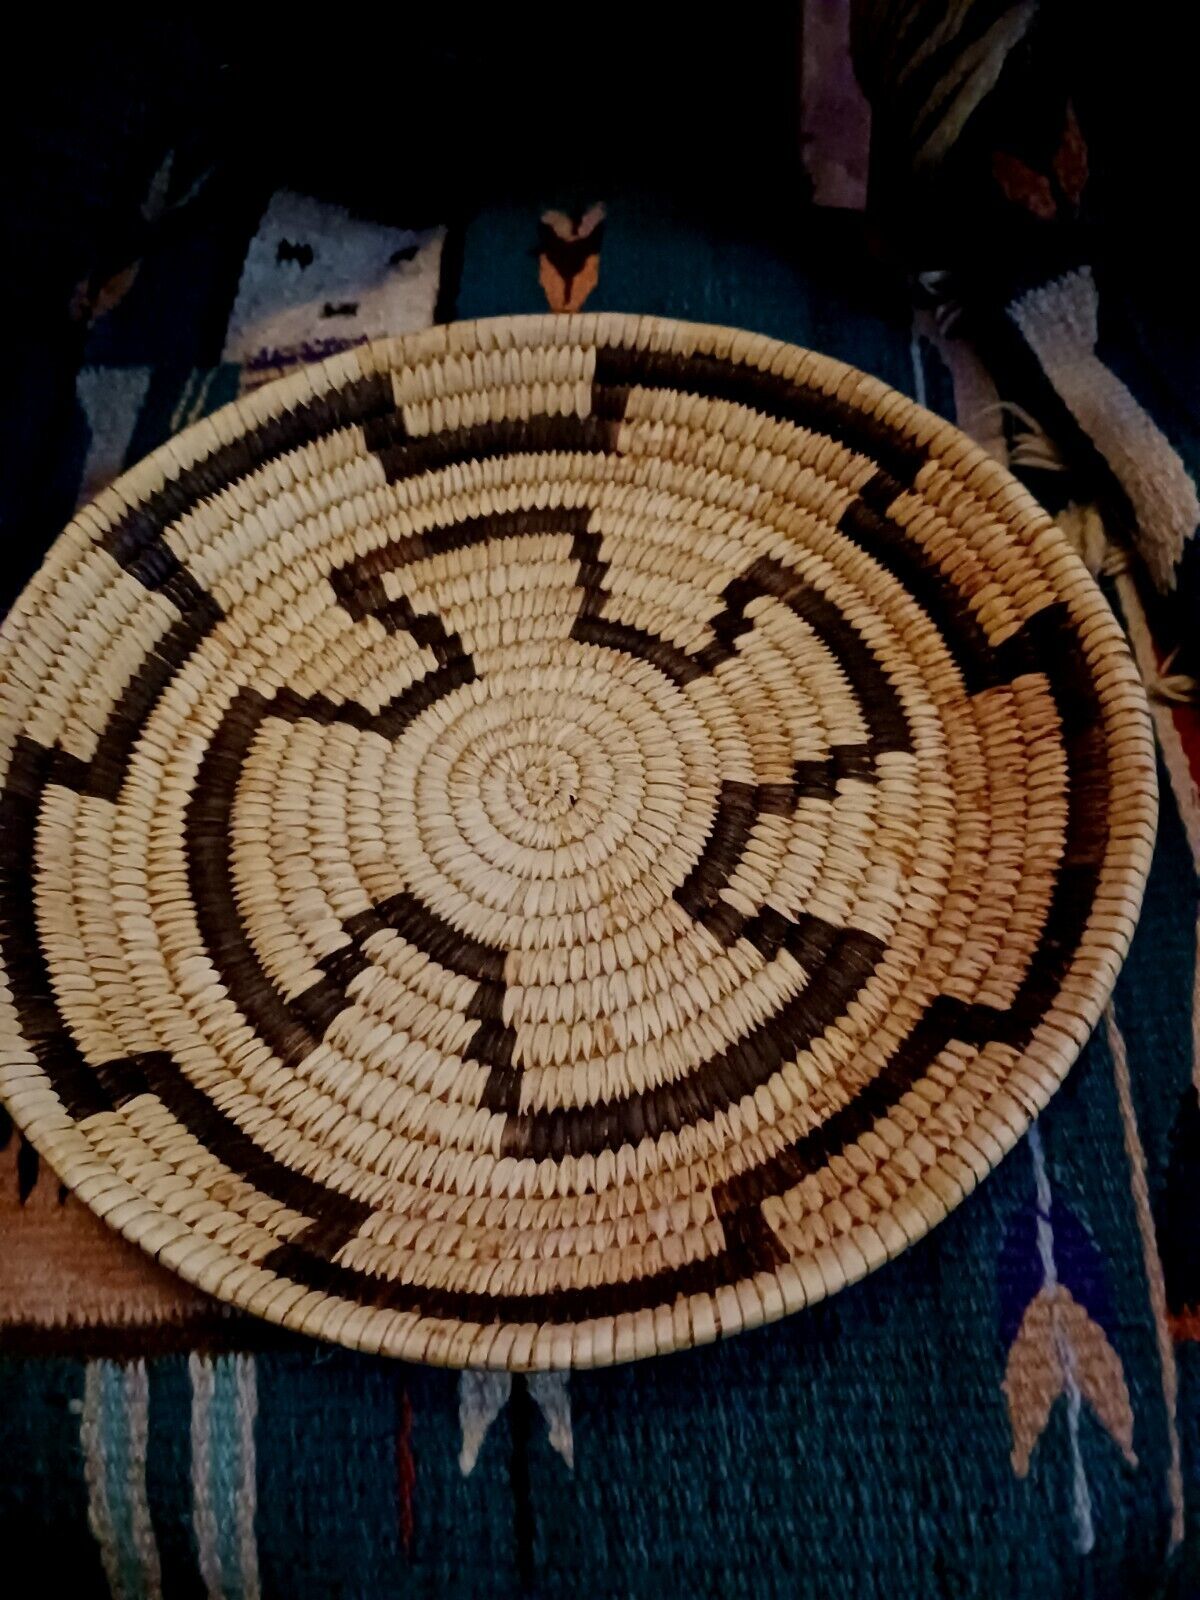 **AWESOME OLDER  VINTAGE NATIVE AMERICAN  PAPAGO  BASKET TRAY  1960s  NICE *